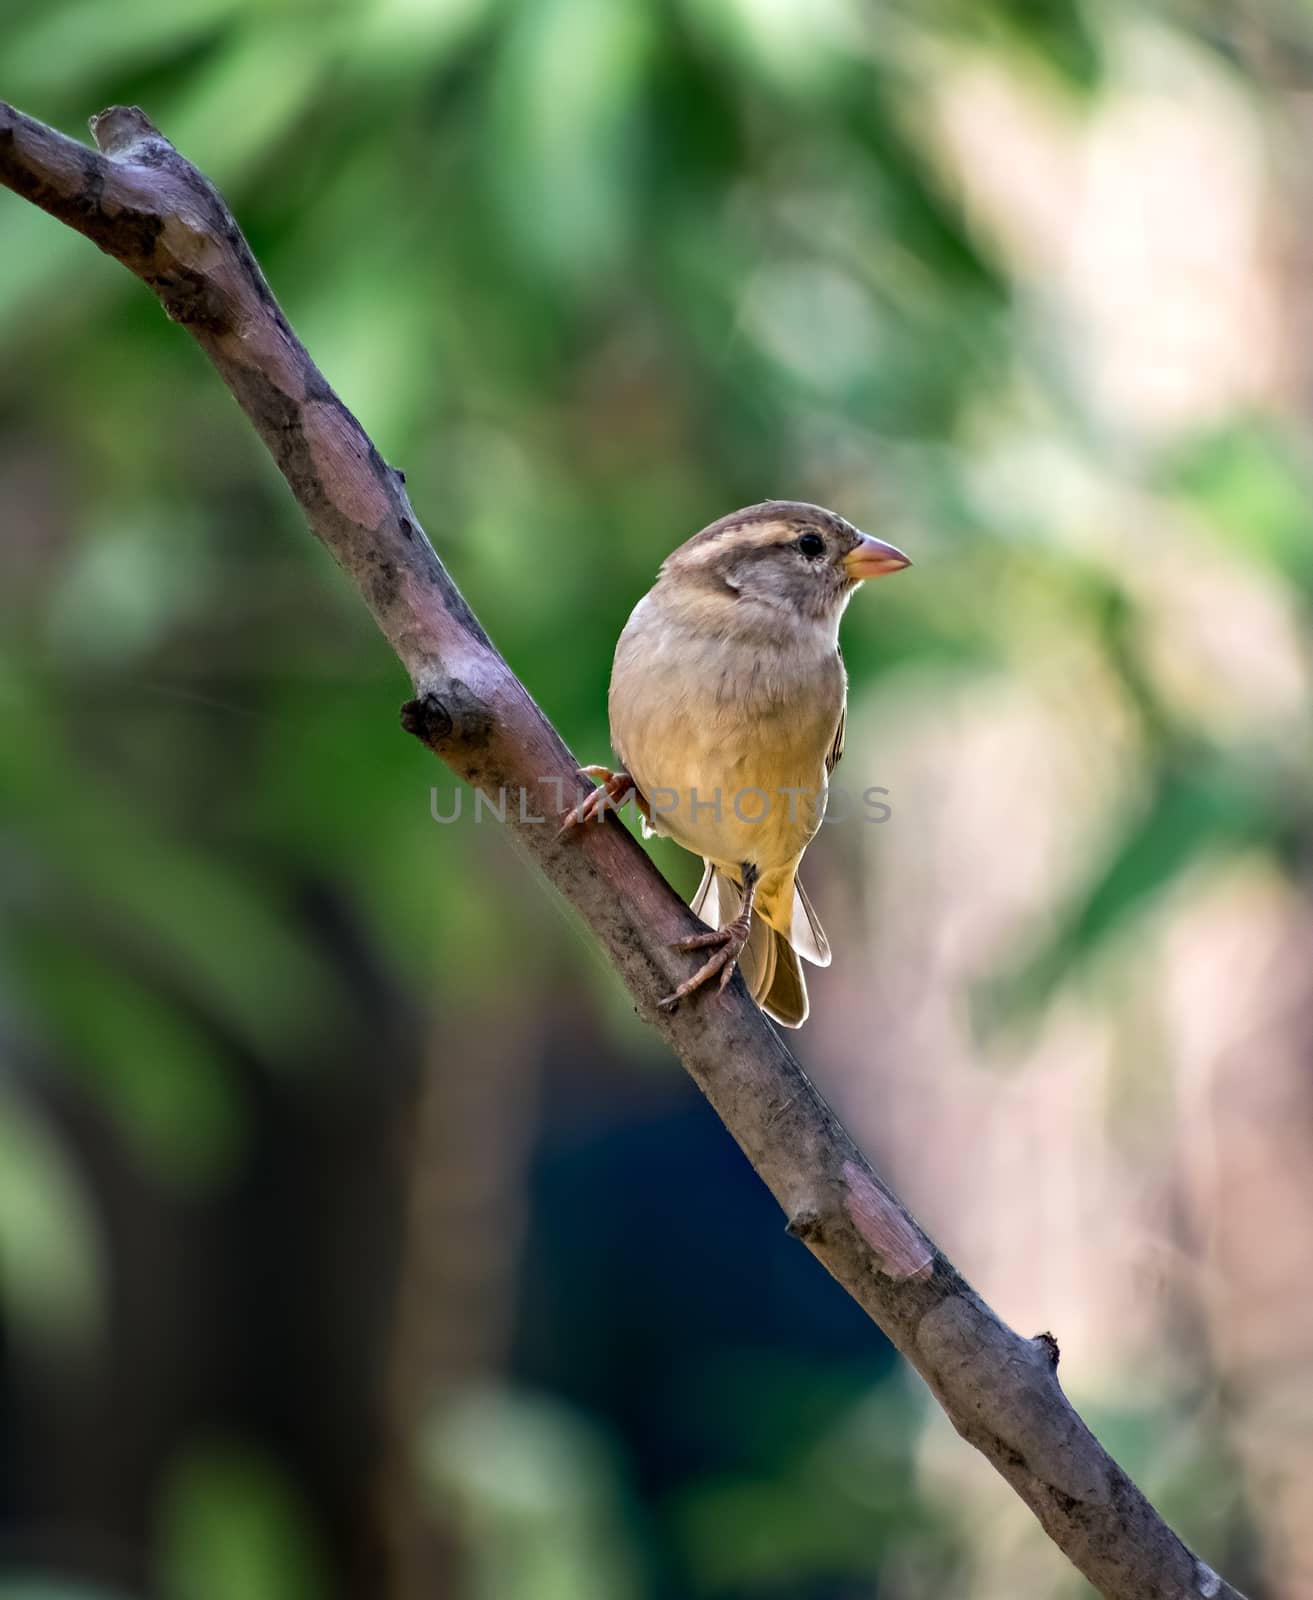 Selective focus, shallow depth of field , Isolated image of a female sparrow on tree branch with clear green background.